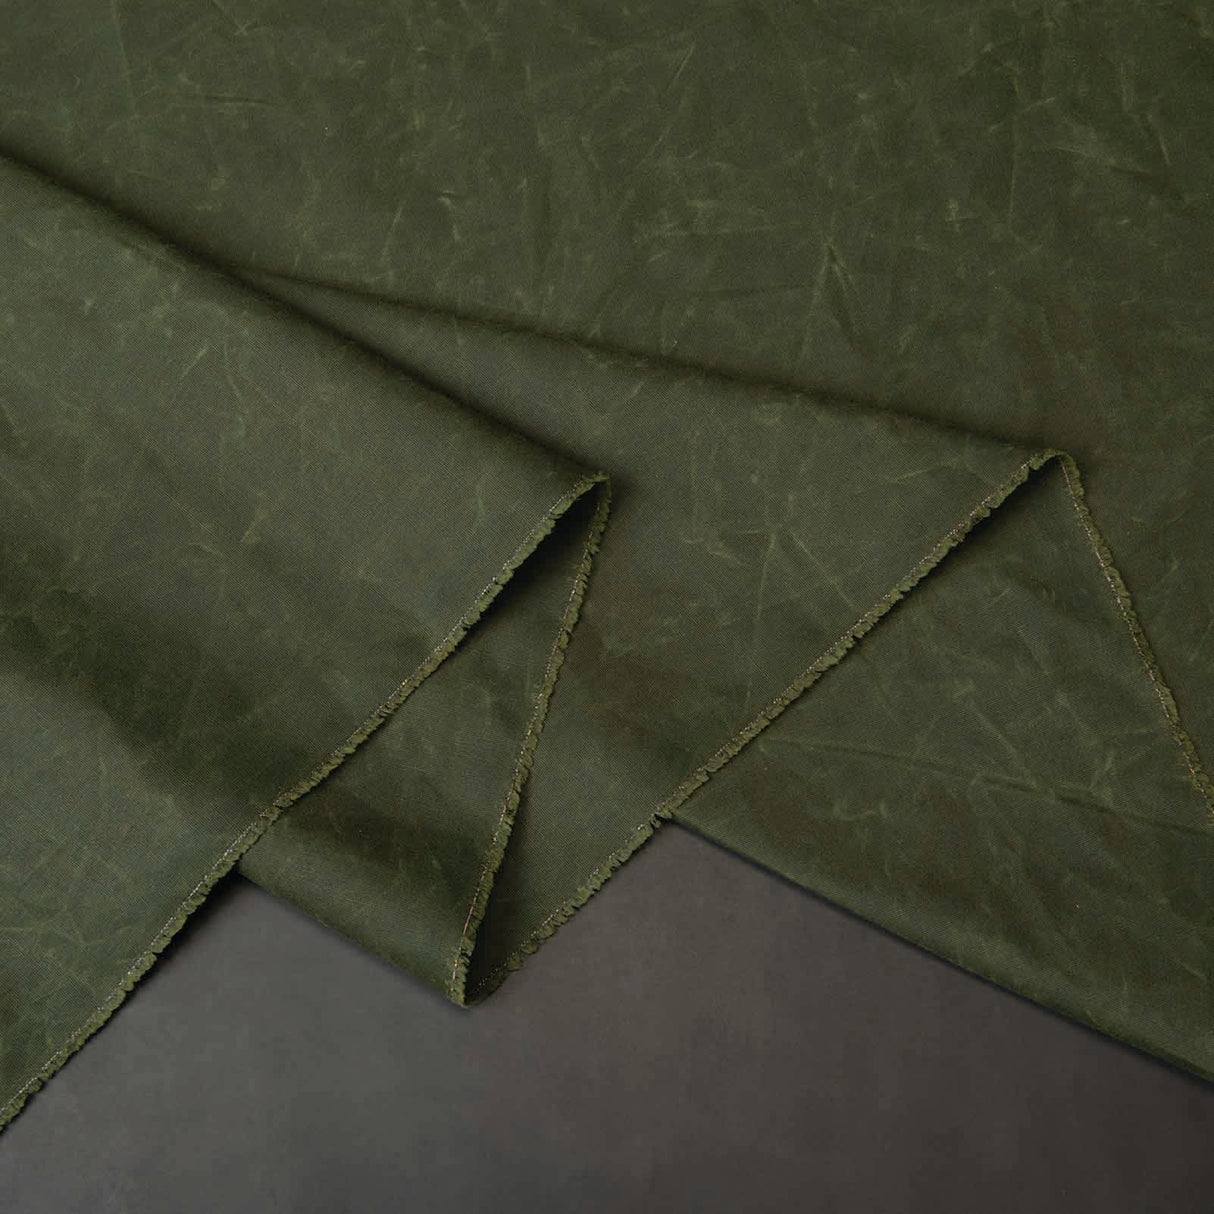 16 Oz Waxed Canvas Fabric, Hand Waxed Cotton Canvas Fabric, Waxed Duck Canvas  Fabric, Waterproof Canvas Fabric, Sold by the Half Yard 